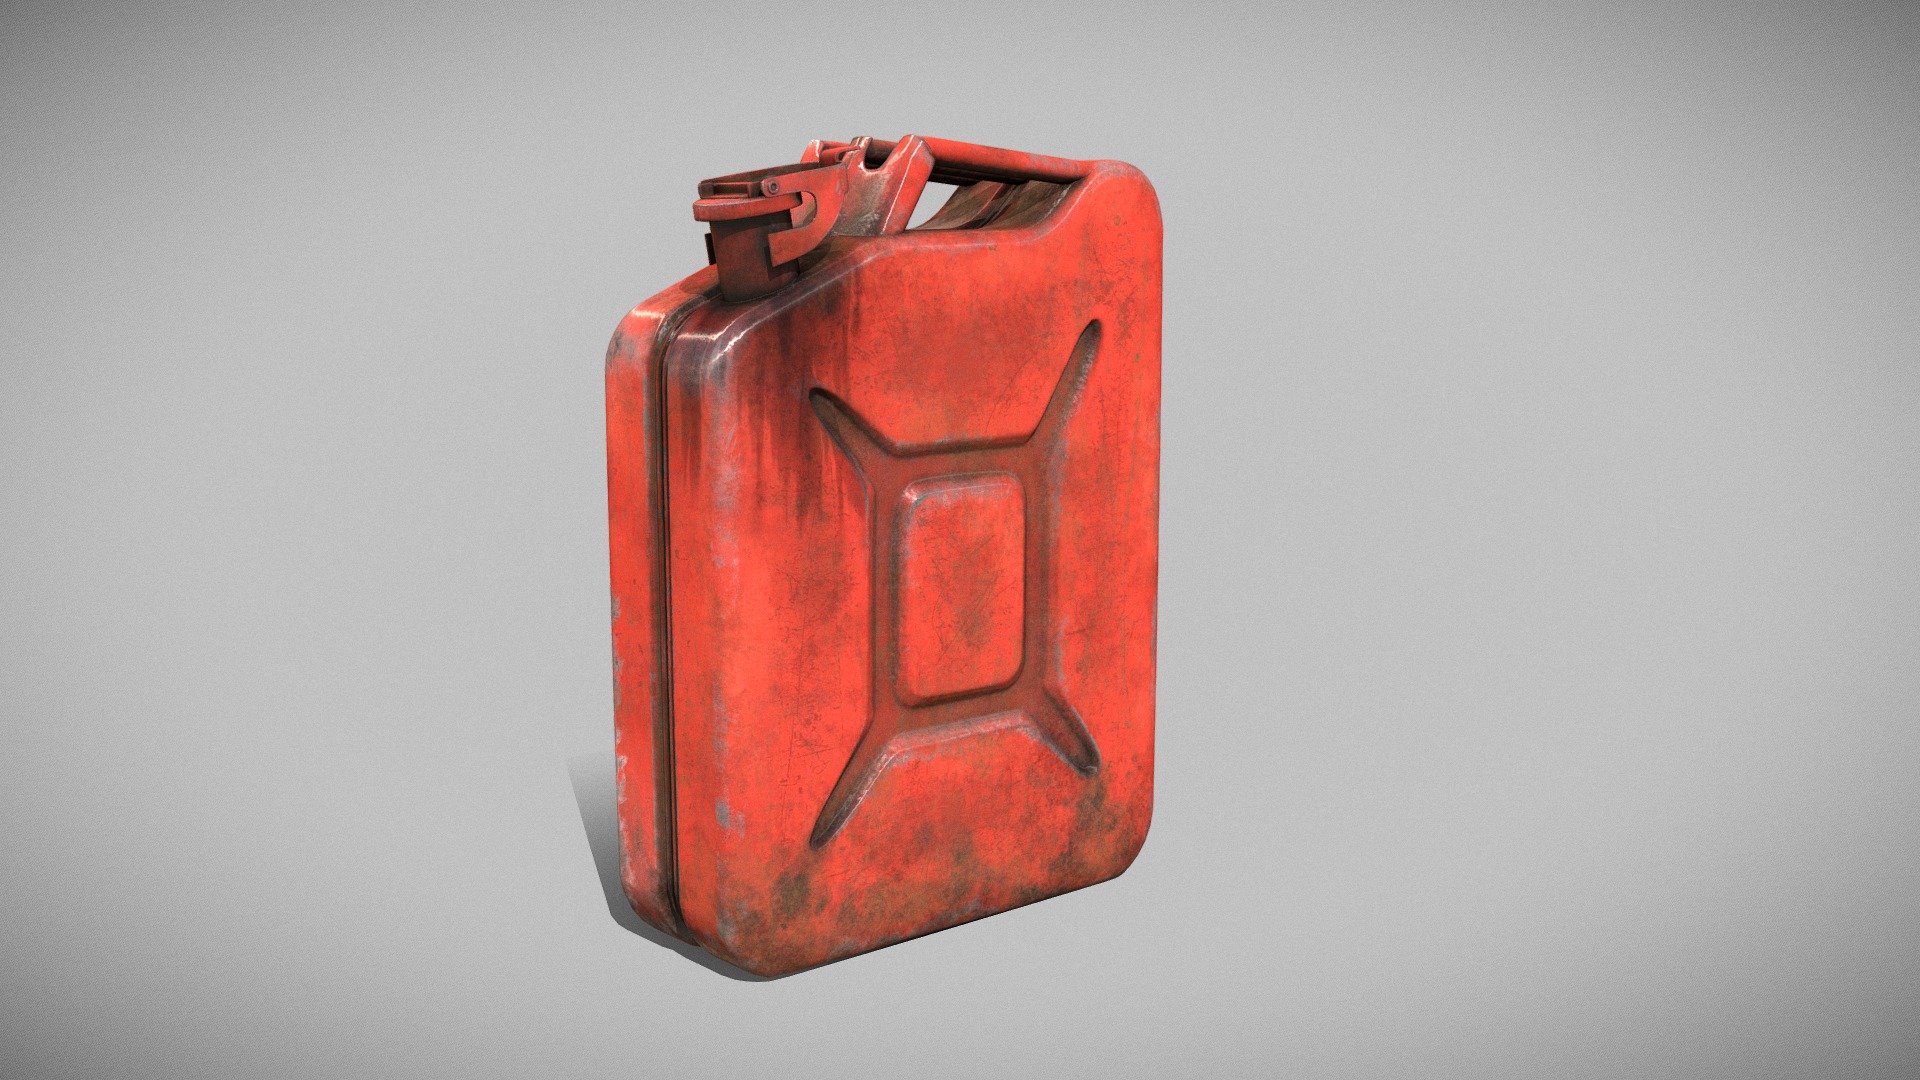 Low poly version of rusted and worn-out gasoline can 3d model